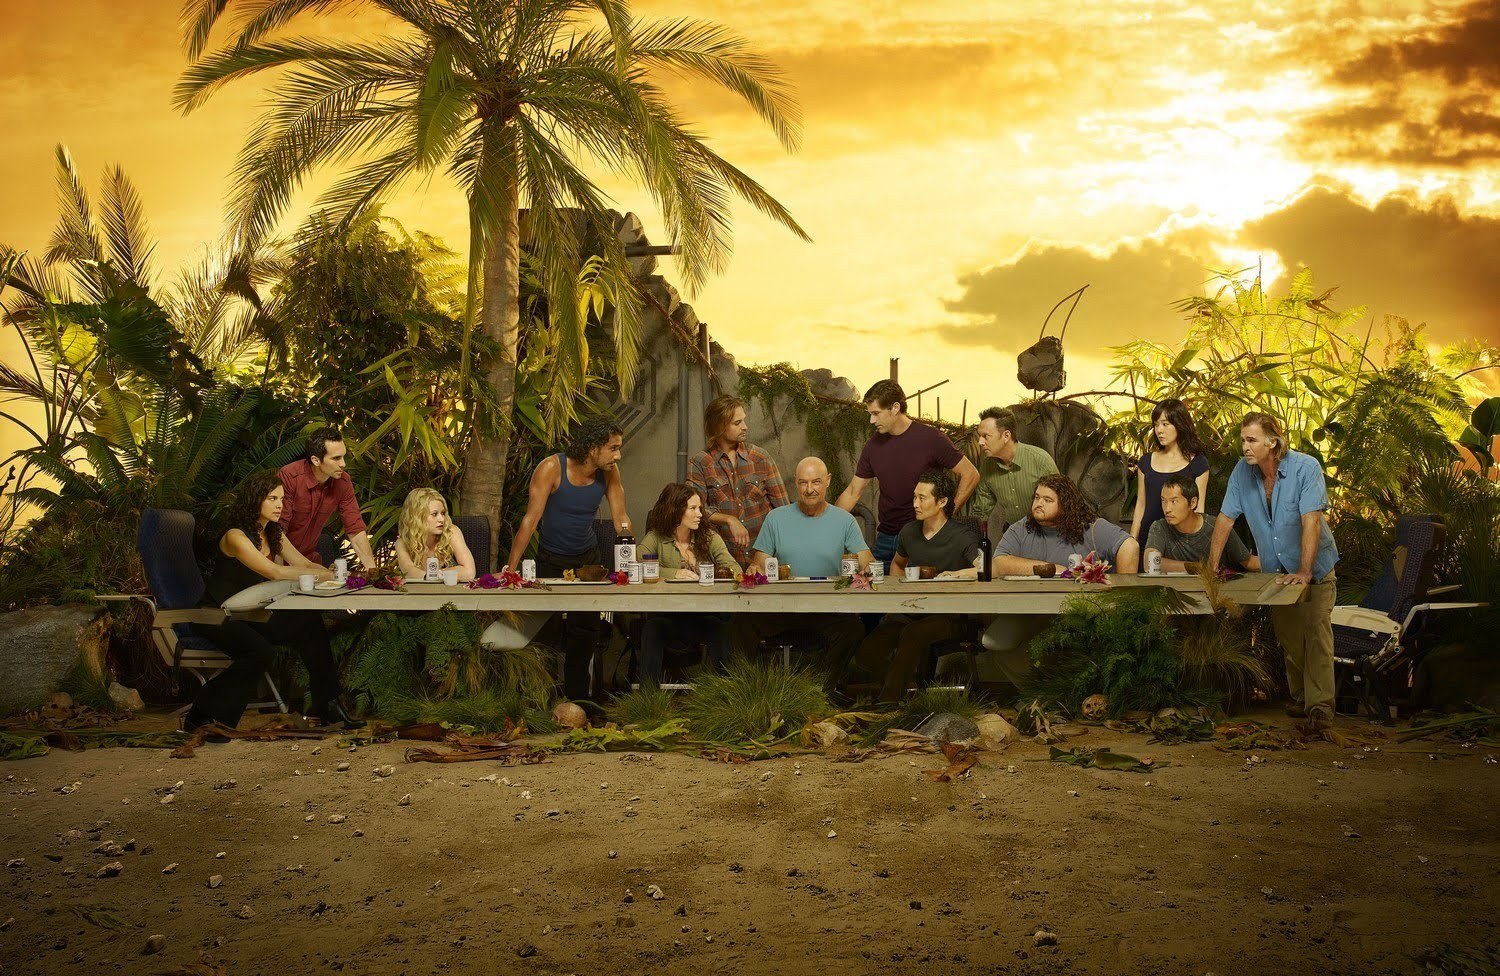 Lost TV Palm Trees The Last Supper Evangeline Lilly 1500x976